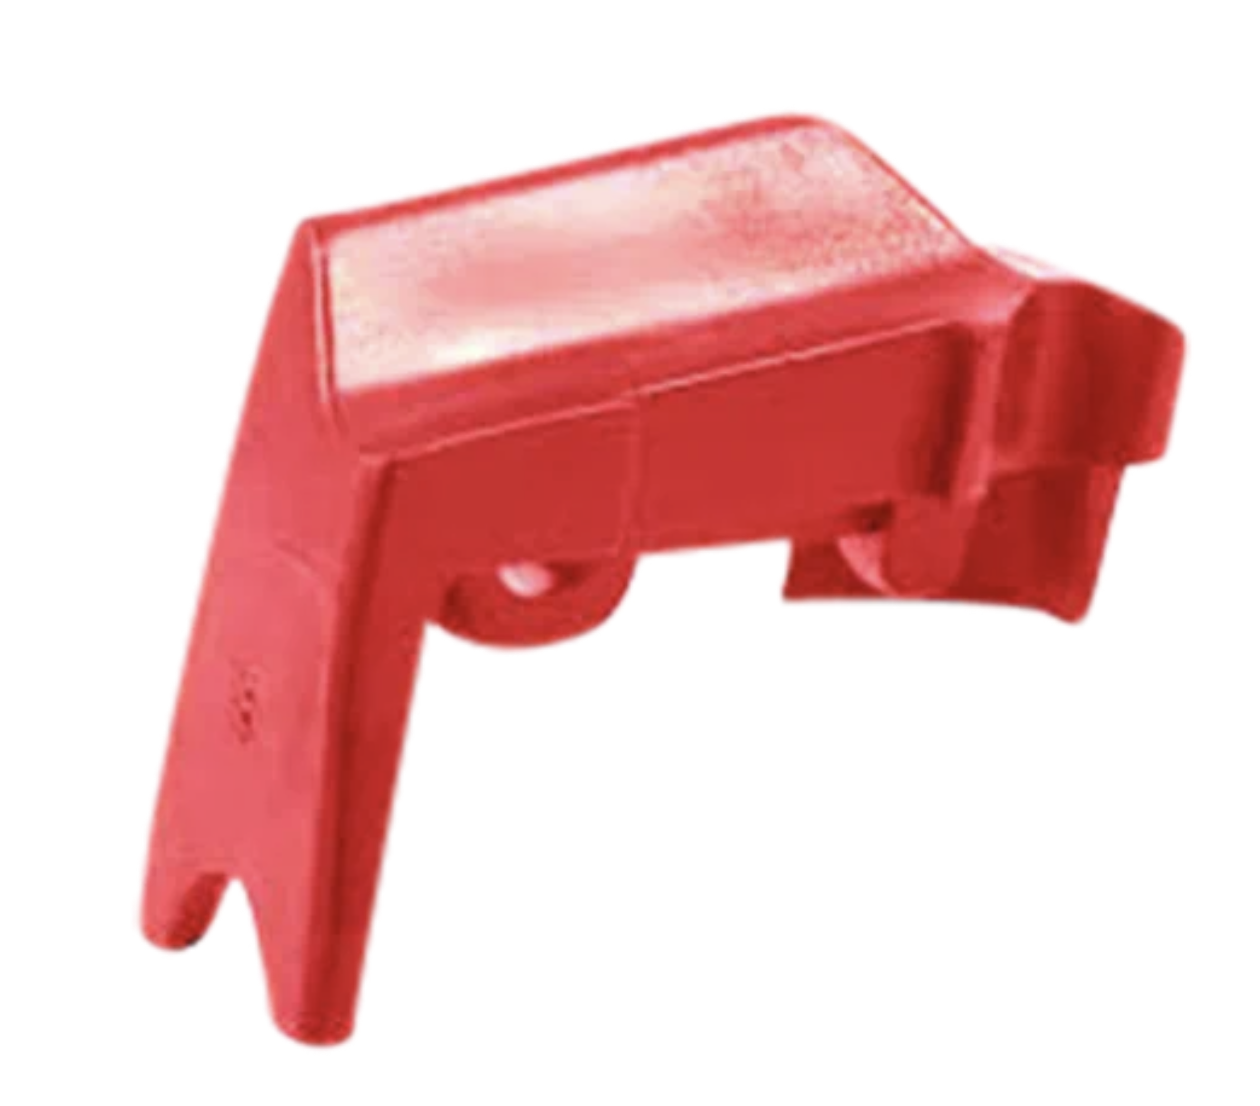 Beretta - Red Elevator for 92 Series and PX4 Magazines